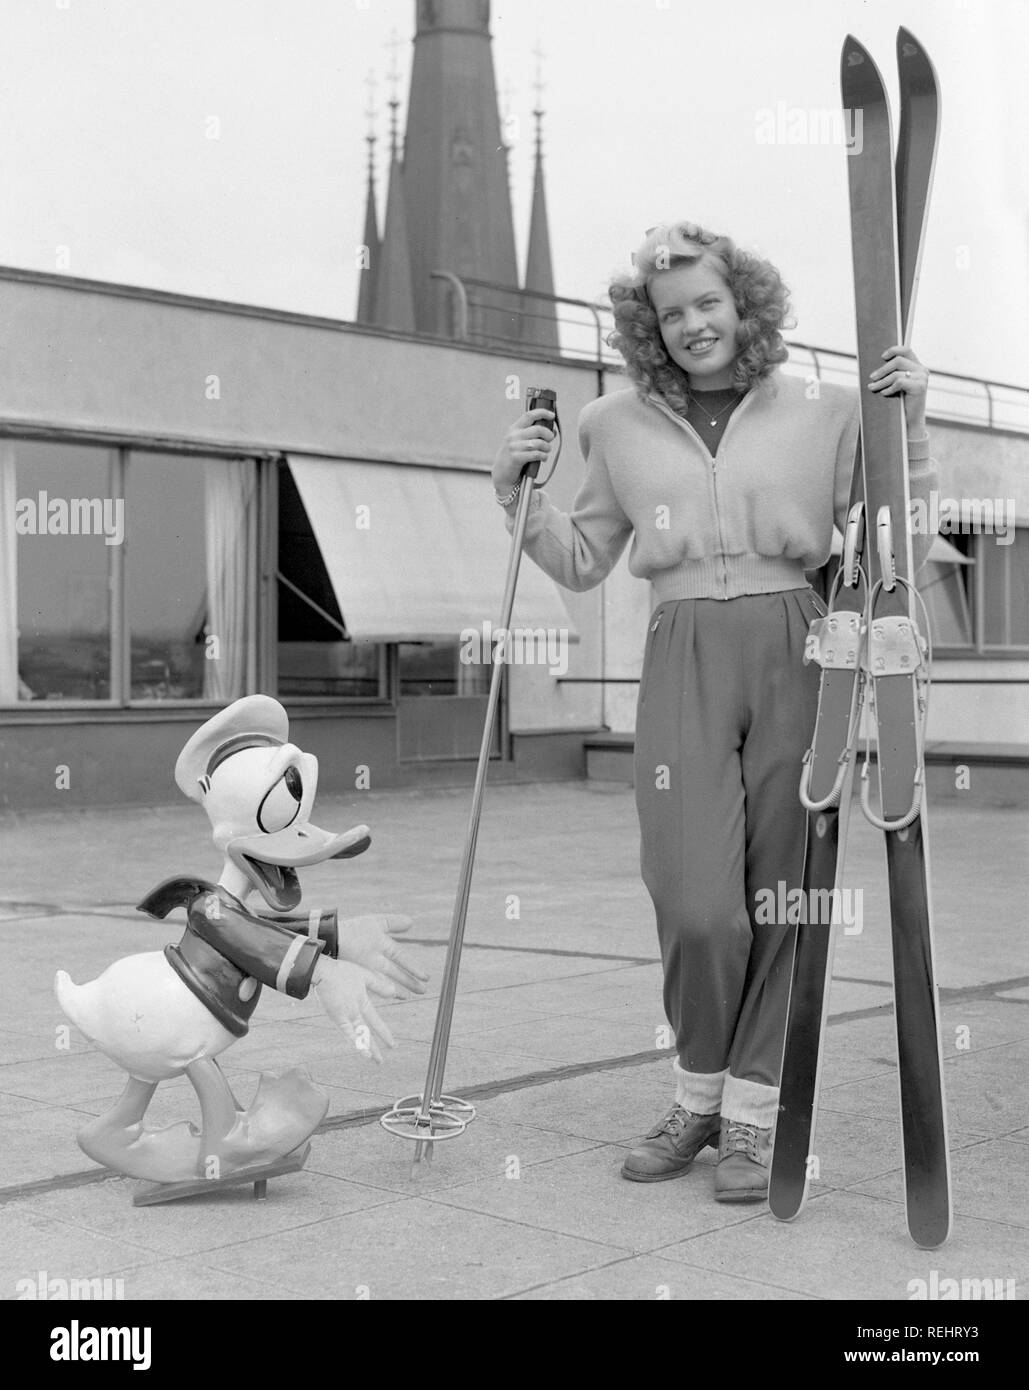 Winter sports in the 1950s. A young blonde woman with her skies, poles and shoes together with a Donald Duck figure. Sweden 1952. Photo Kristoffersson ref  179A-1 Stock Photo